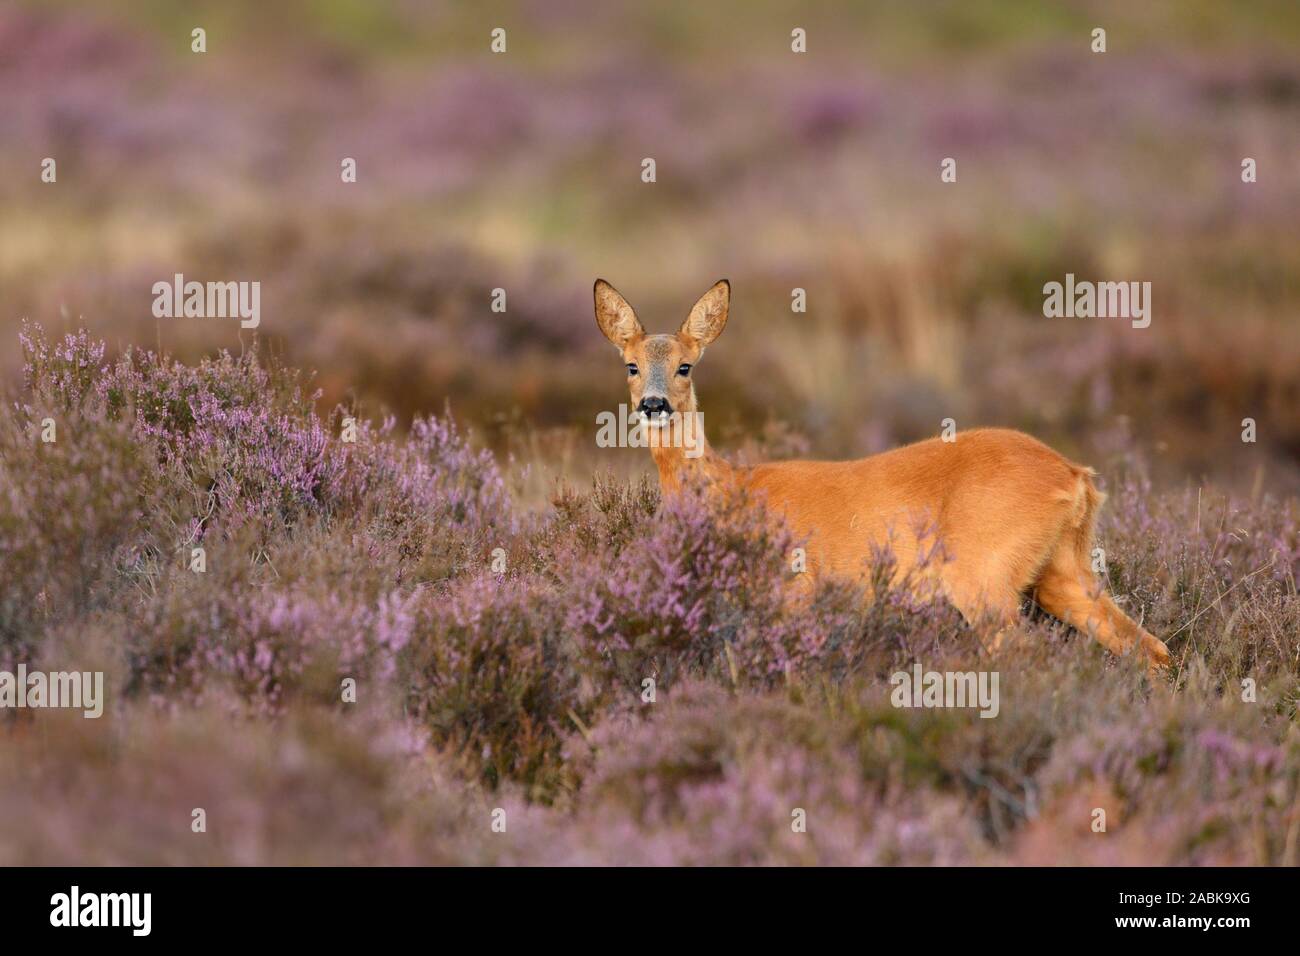 Roe Deer ( Capreolus capreolus ), female, doe, standing in violett blooming / blossoming heather, watching attentively, wildlife, Europe. Stock Photo